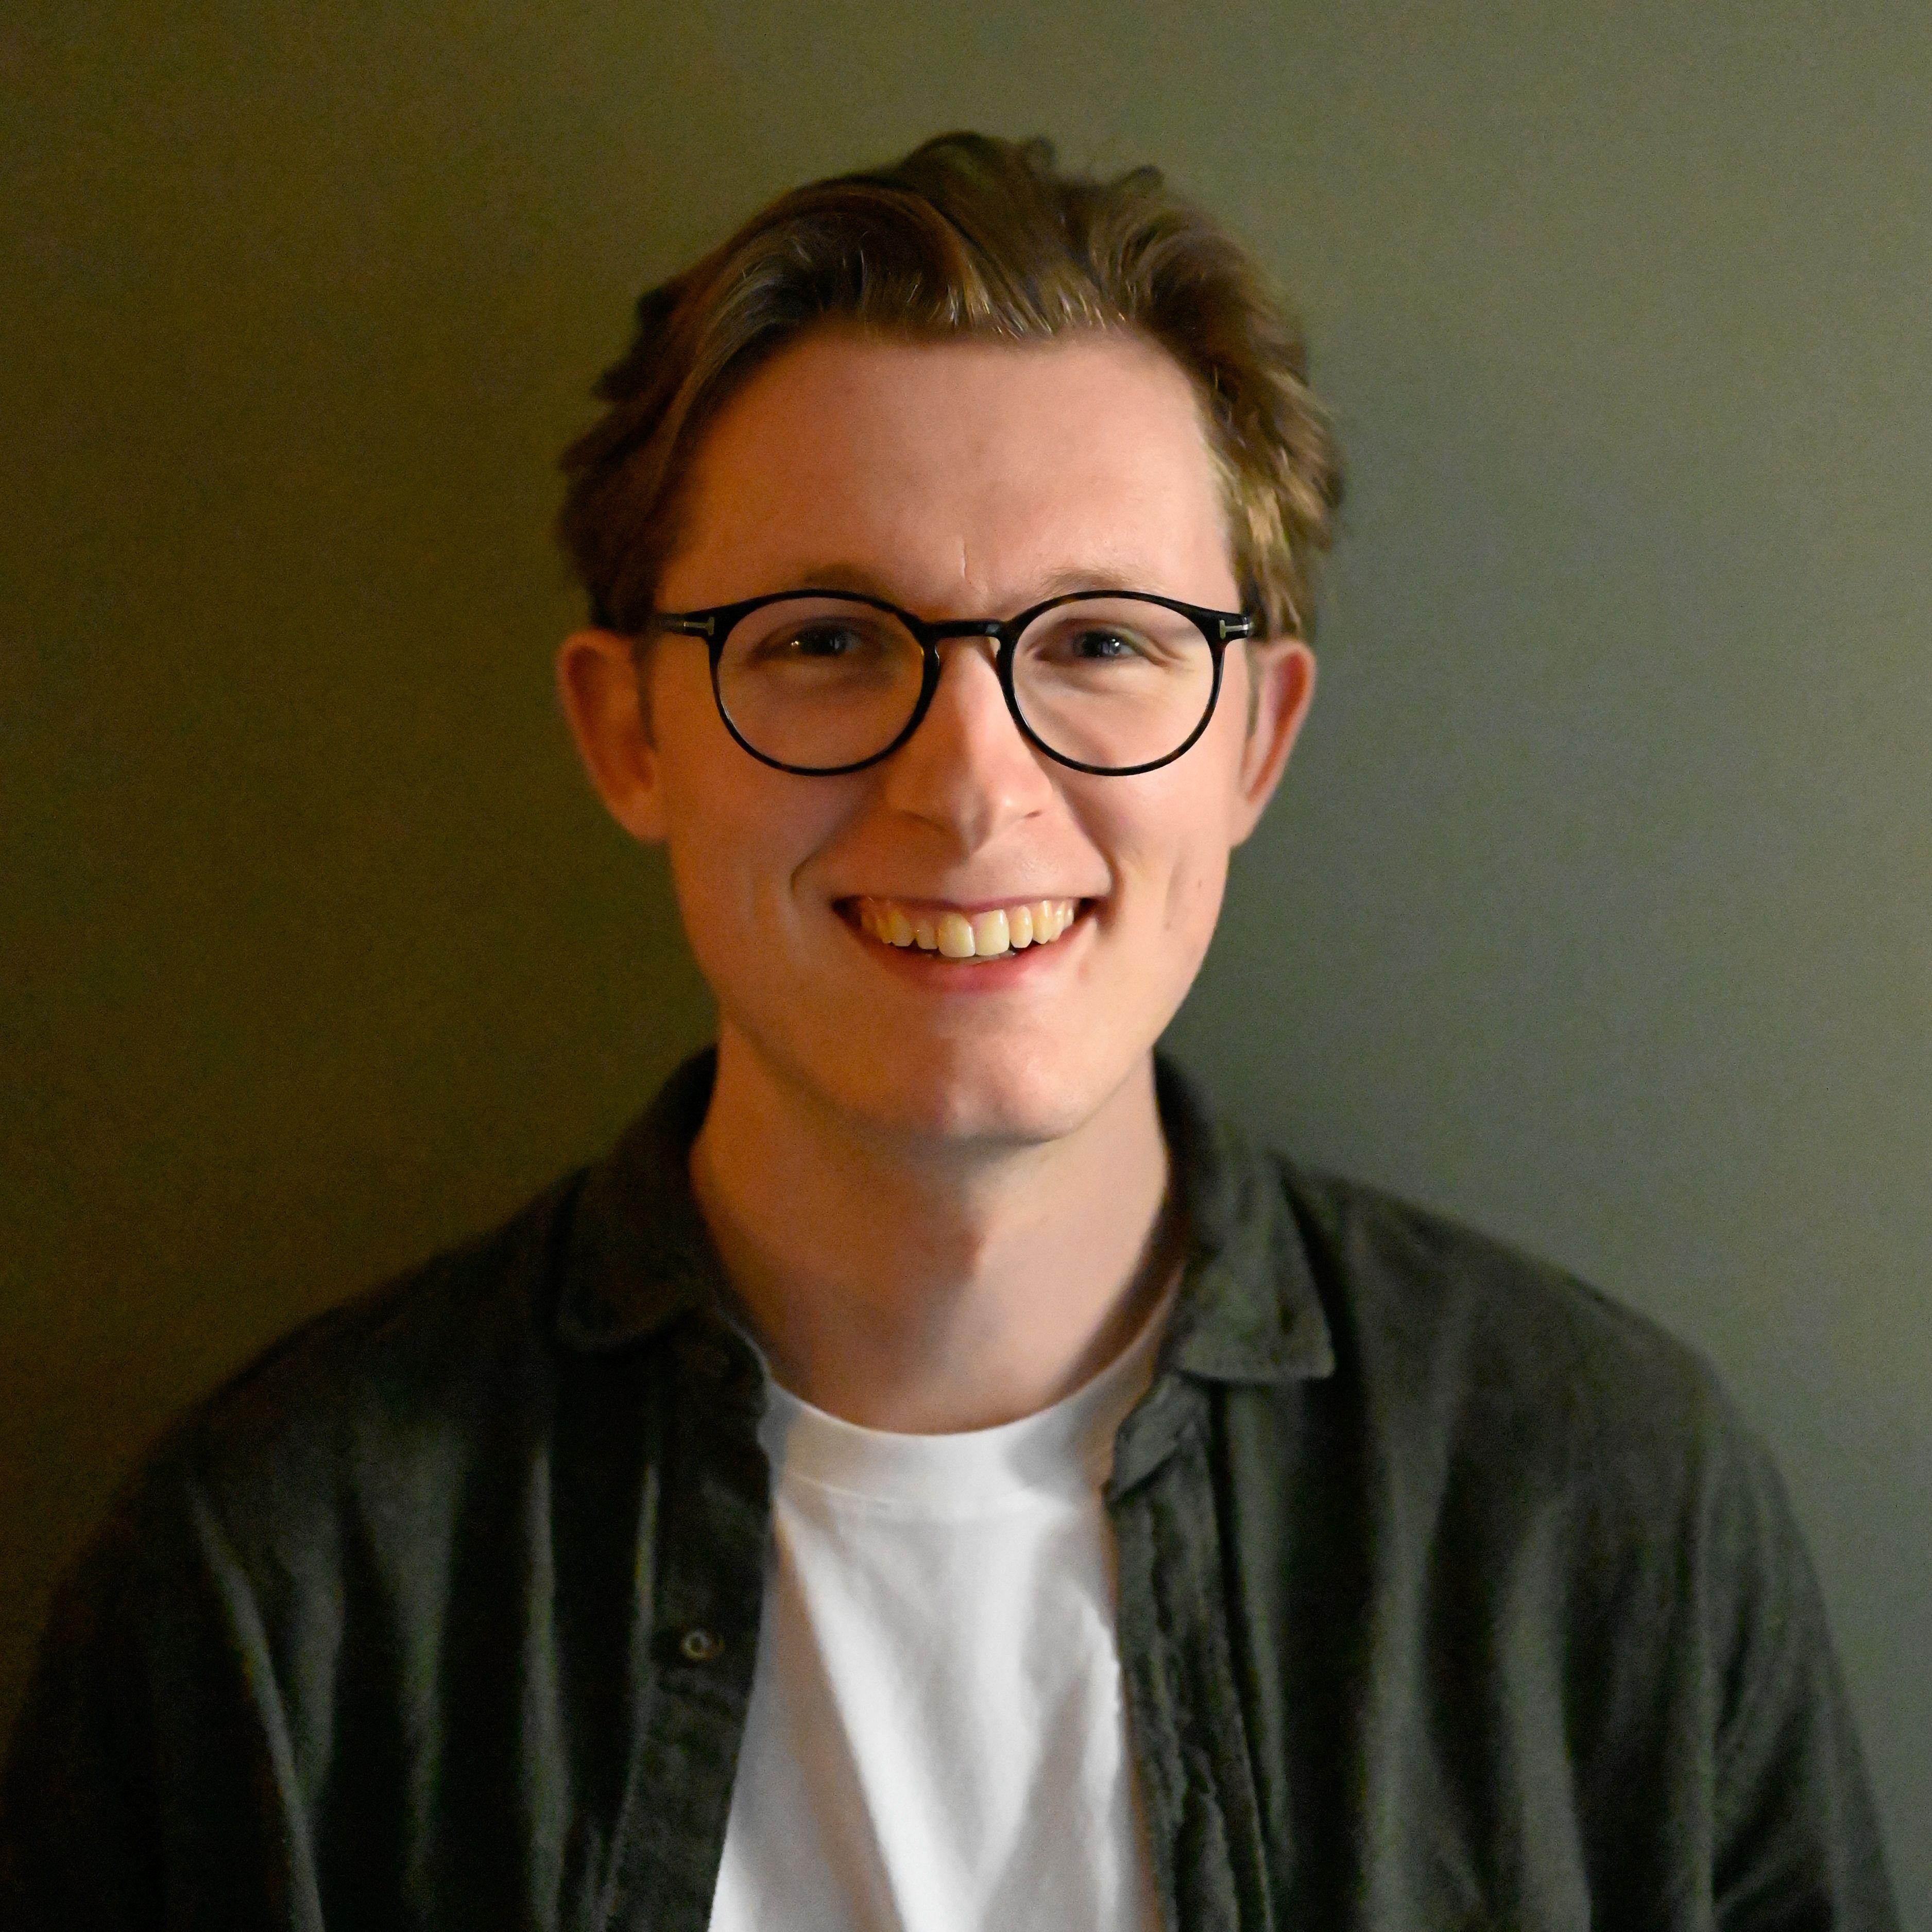 Mikkel - One of the software developers from Apptitude